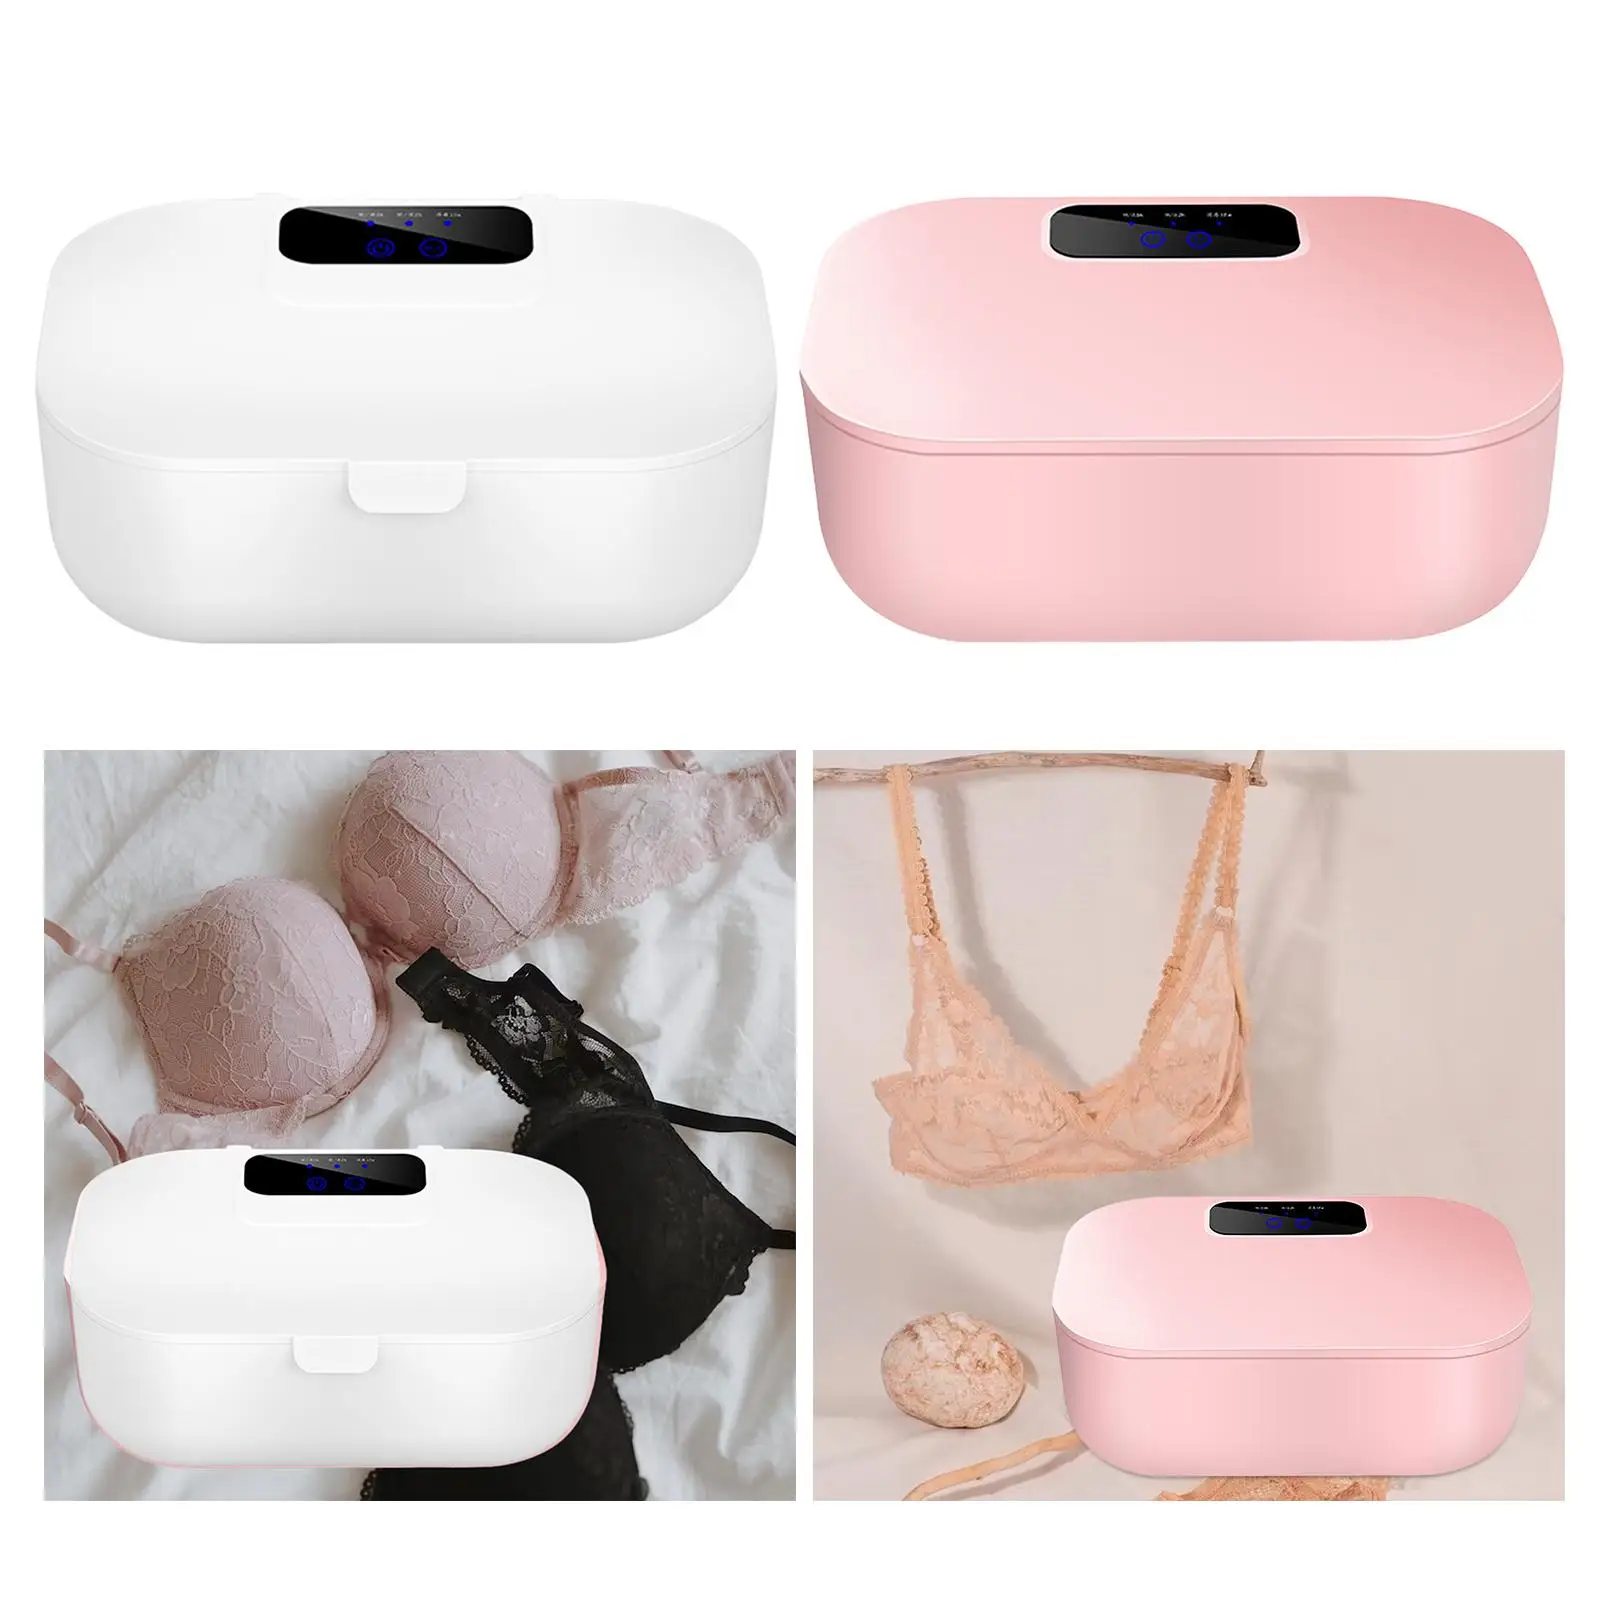 UV Light Clothes Dryer Box Lightweight Multifunctional Portable Household Mini for Towels Socks Makeup Tools Underwear Panties